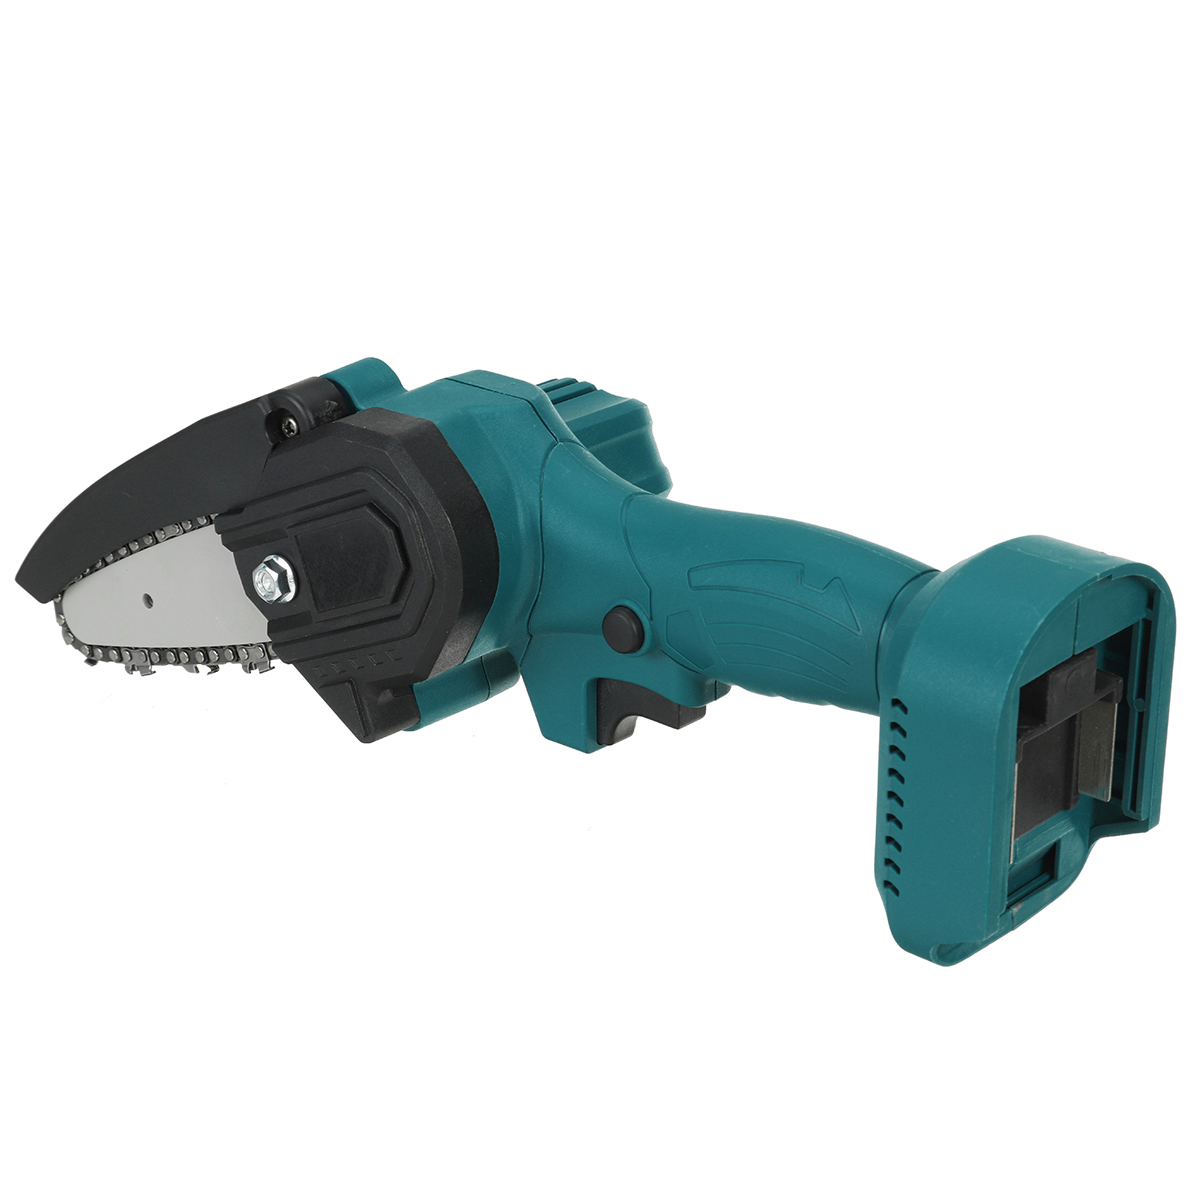 4Inch-300W-1200mah-Electric-Chain-Saw-Pruning-ChainSaw-Cordless-Woodworking-Cutter-Tool-W-None1pc2pc-1821957-7